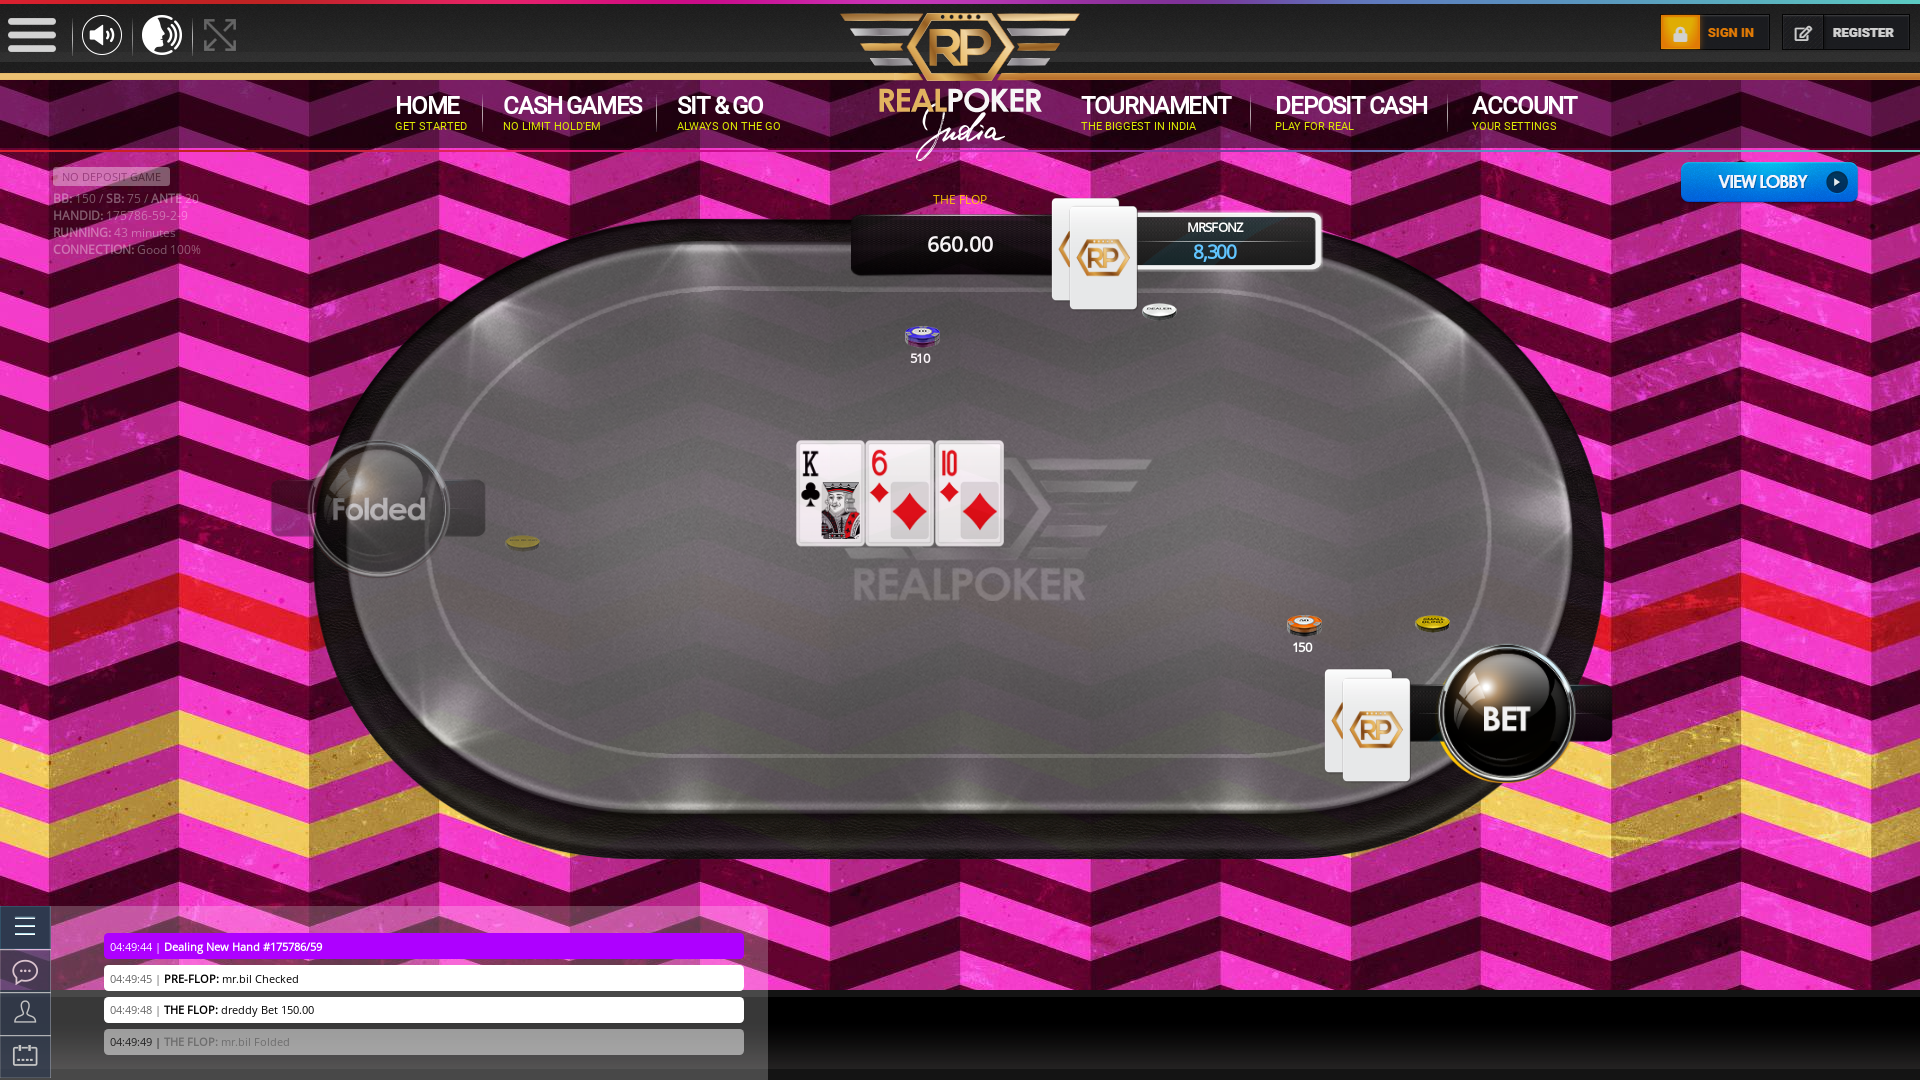 10 player poker in the 43rd minute